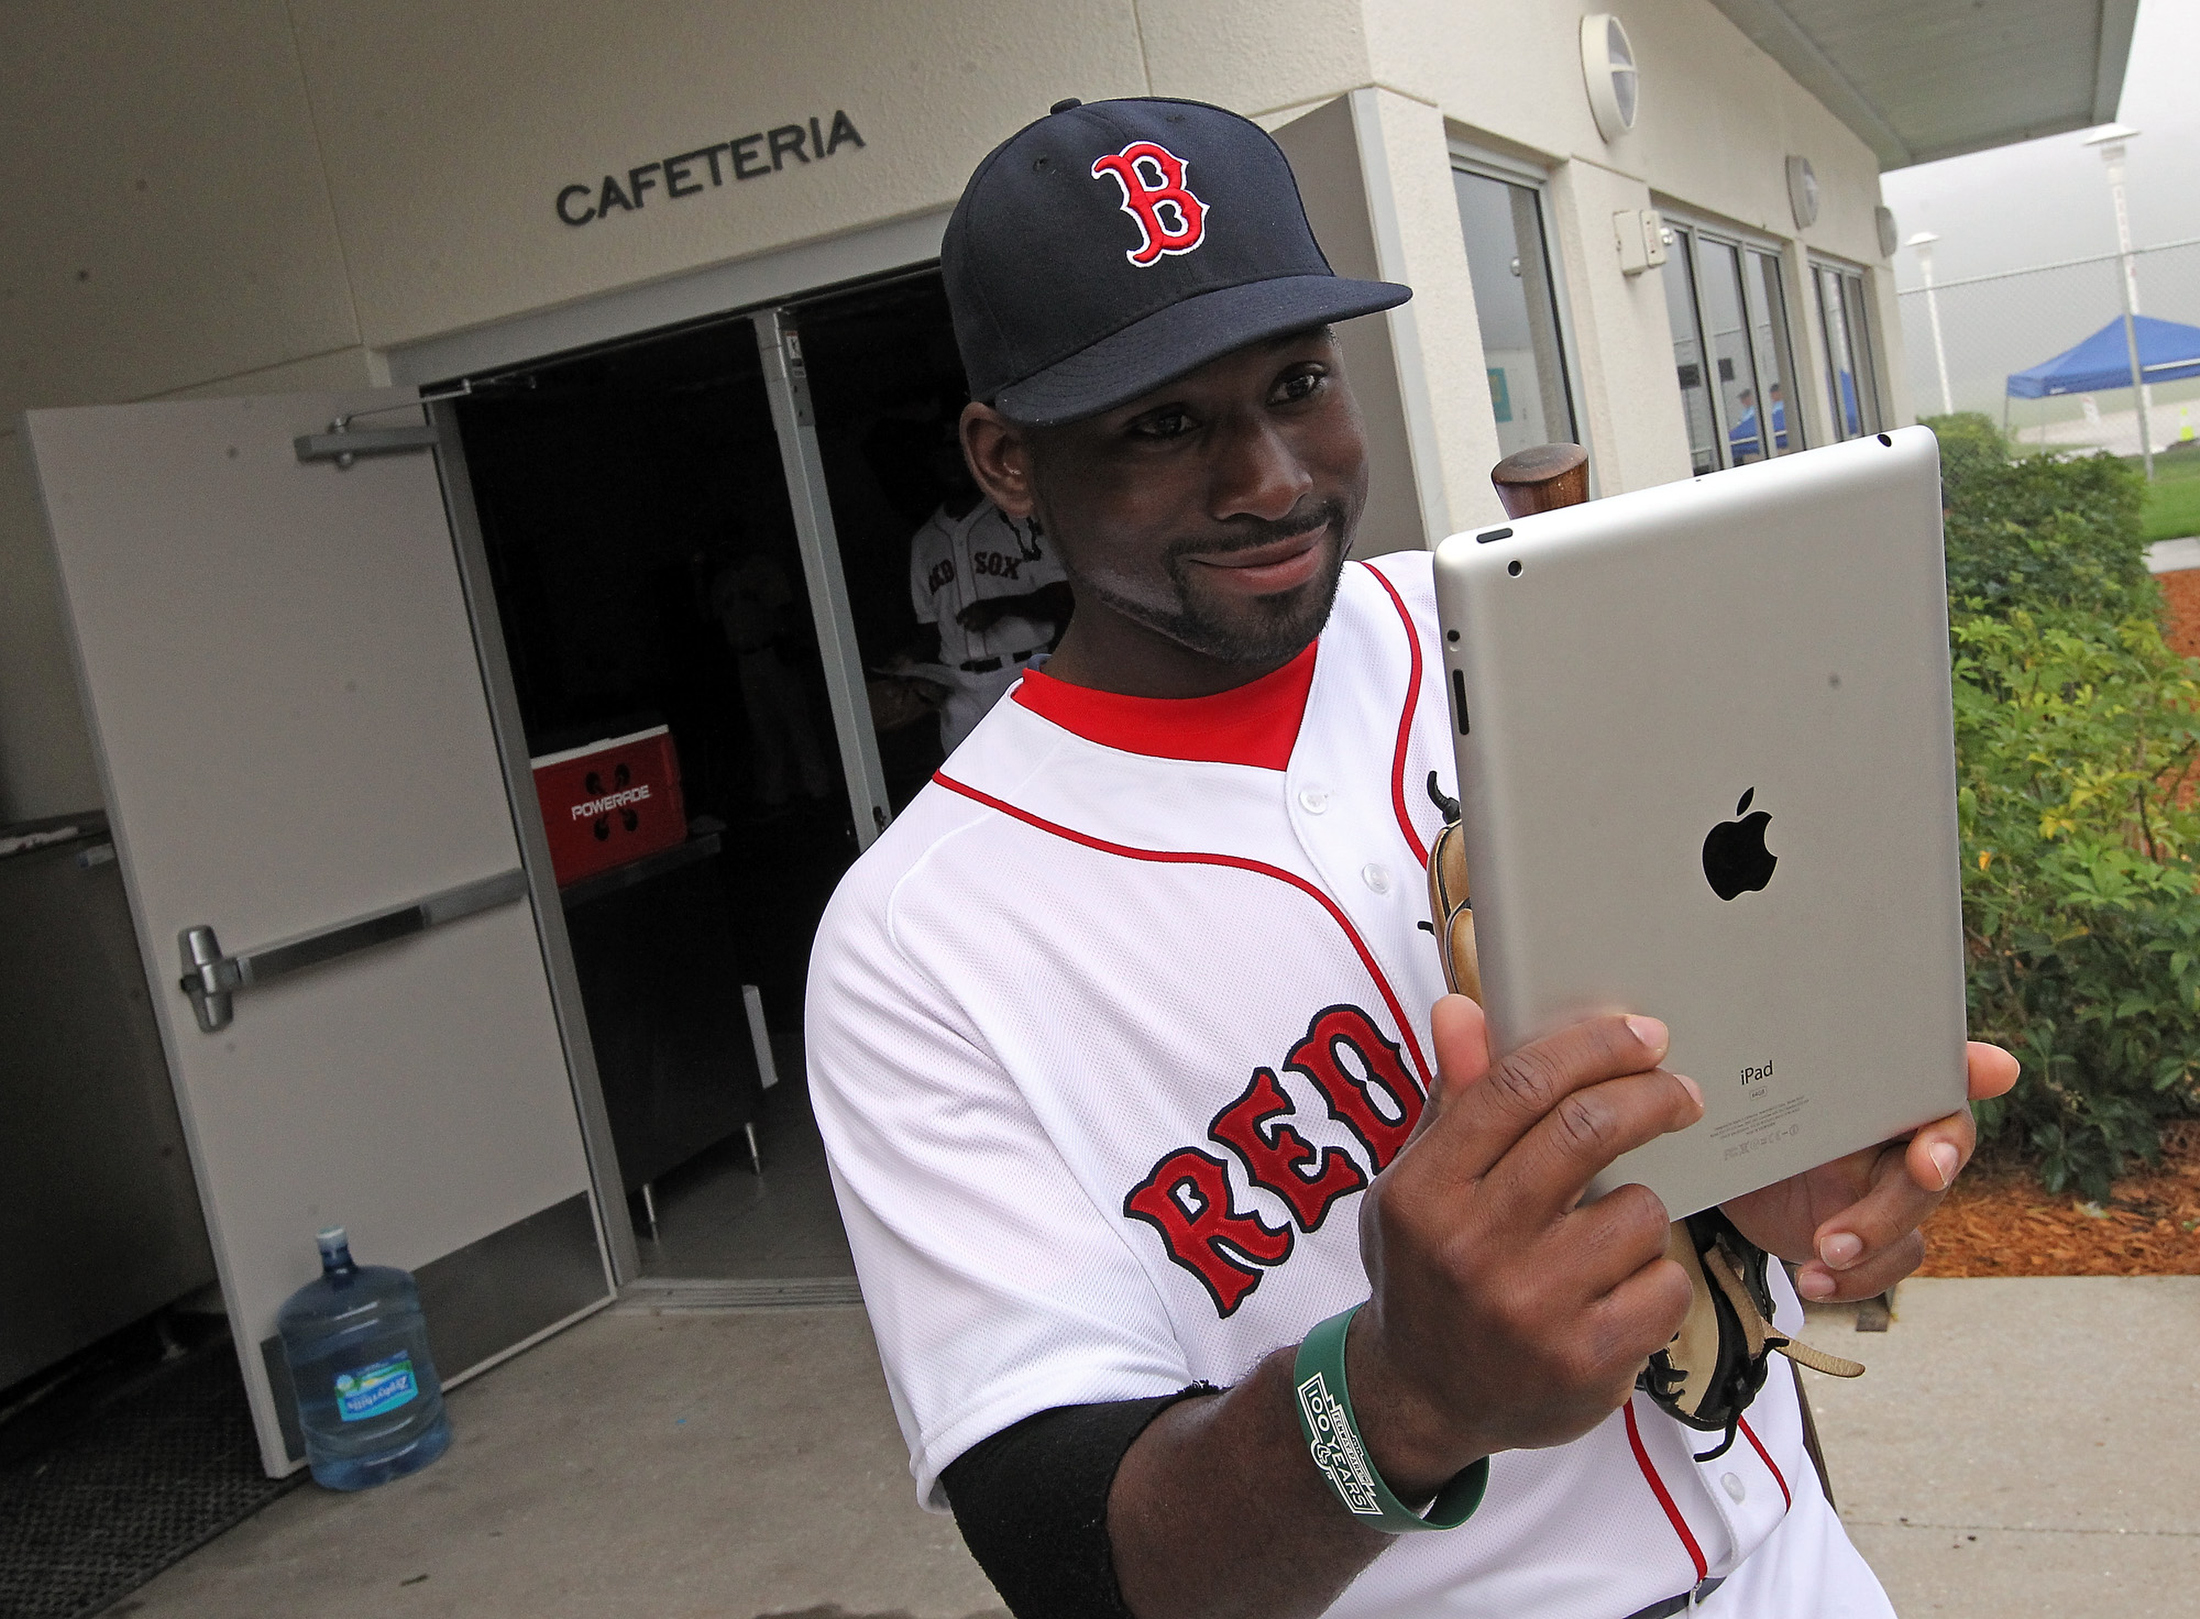 (Fort Myers, FL, 02/23/14) Using an iPad, Boston Red Sox center fielder Jackie Bradley Jr. photographs himself and then Tweets it during Picture Day at Red Sox Spring Training on Sunday, February 23, 2014. Staff Photo by Matt Stone